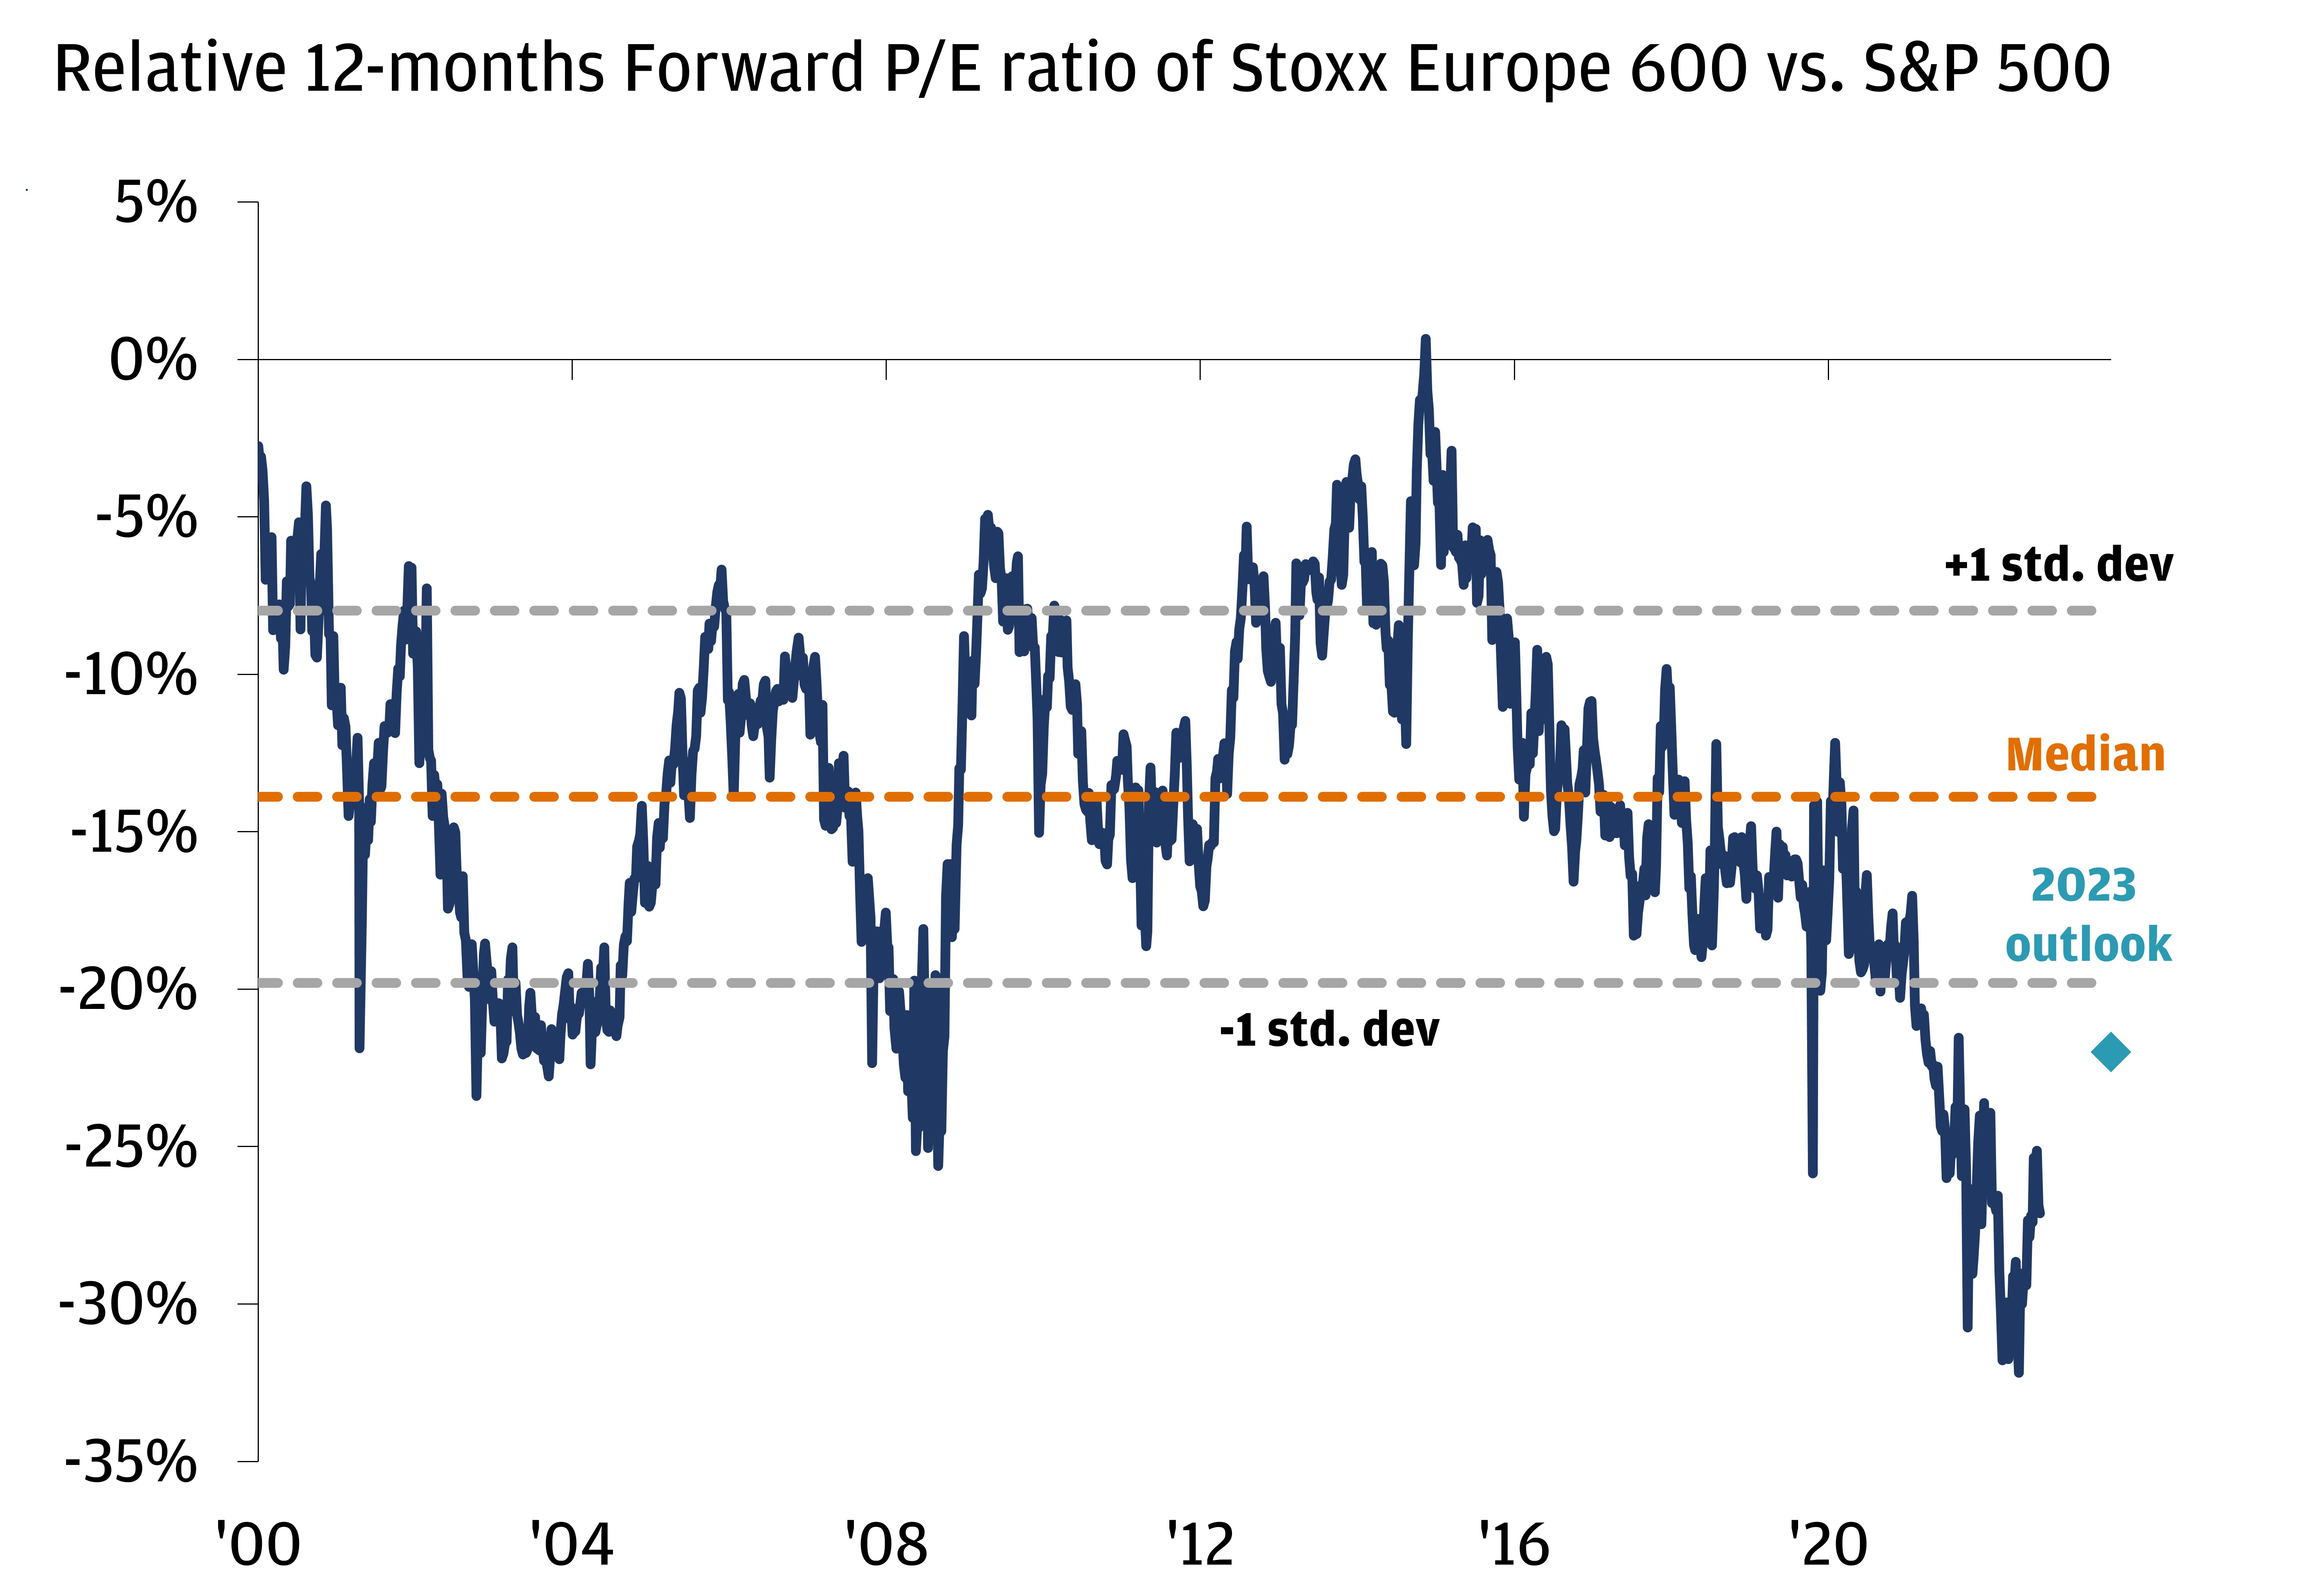 This graph shows the 12-month forward P/E ratio of Stoxx Europe 600 versus S&P 500, from June 1, 2000, until February 7, 2023.